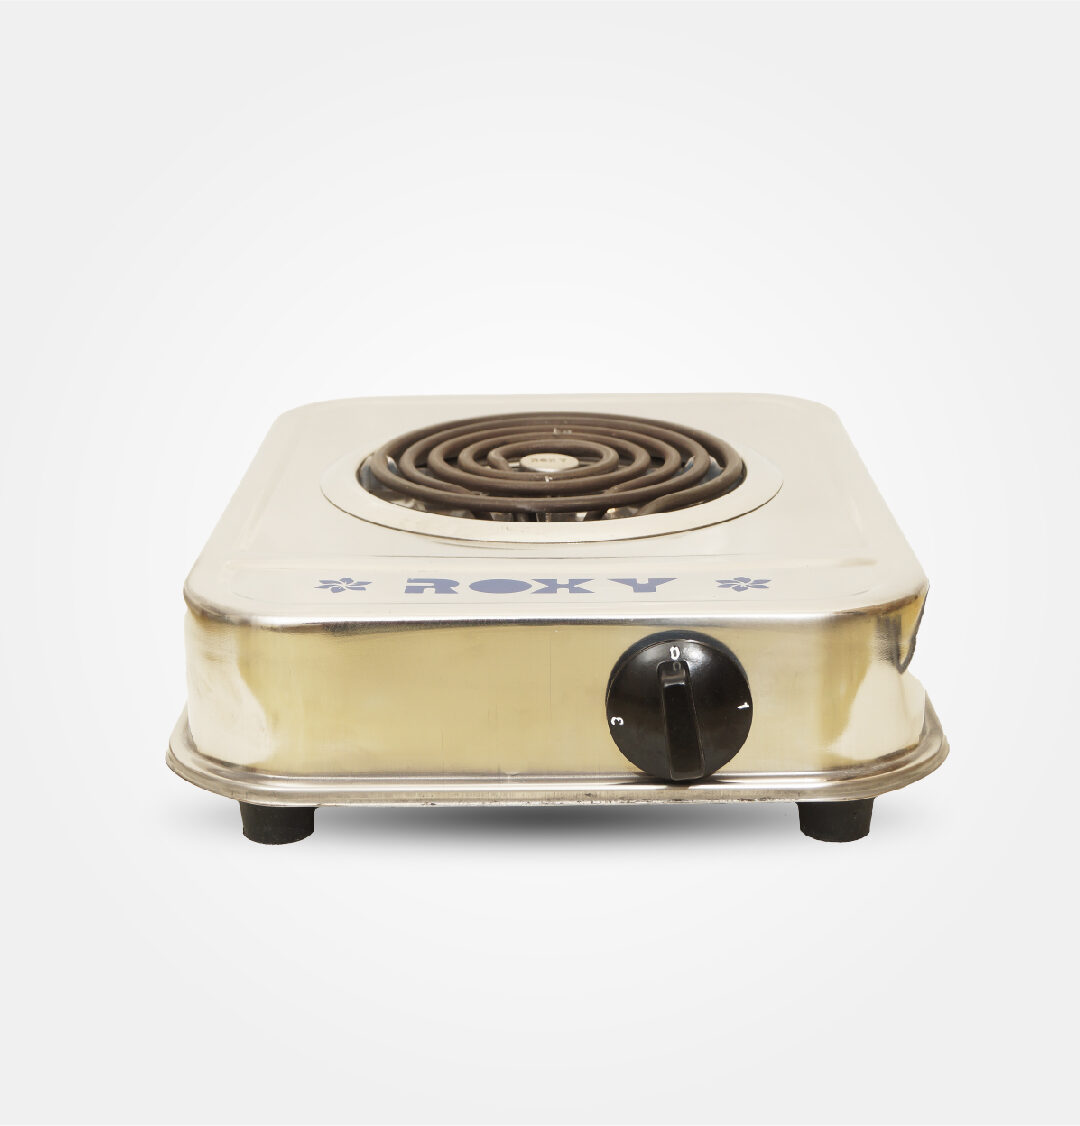 GE Hot Plate Flora (Stainless Steel)